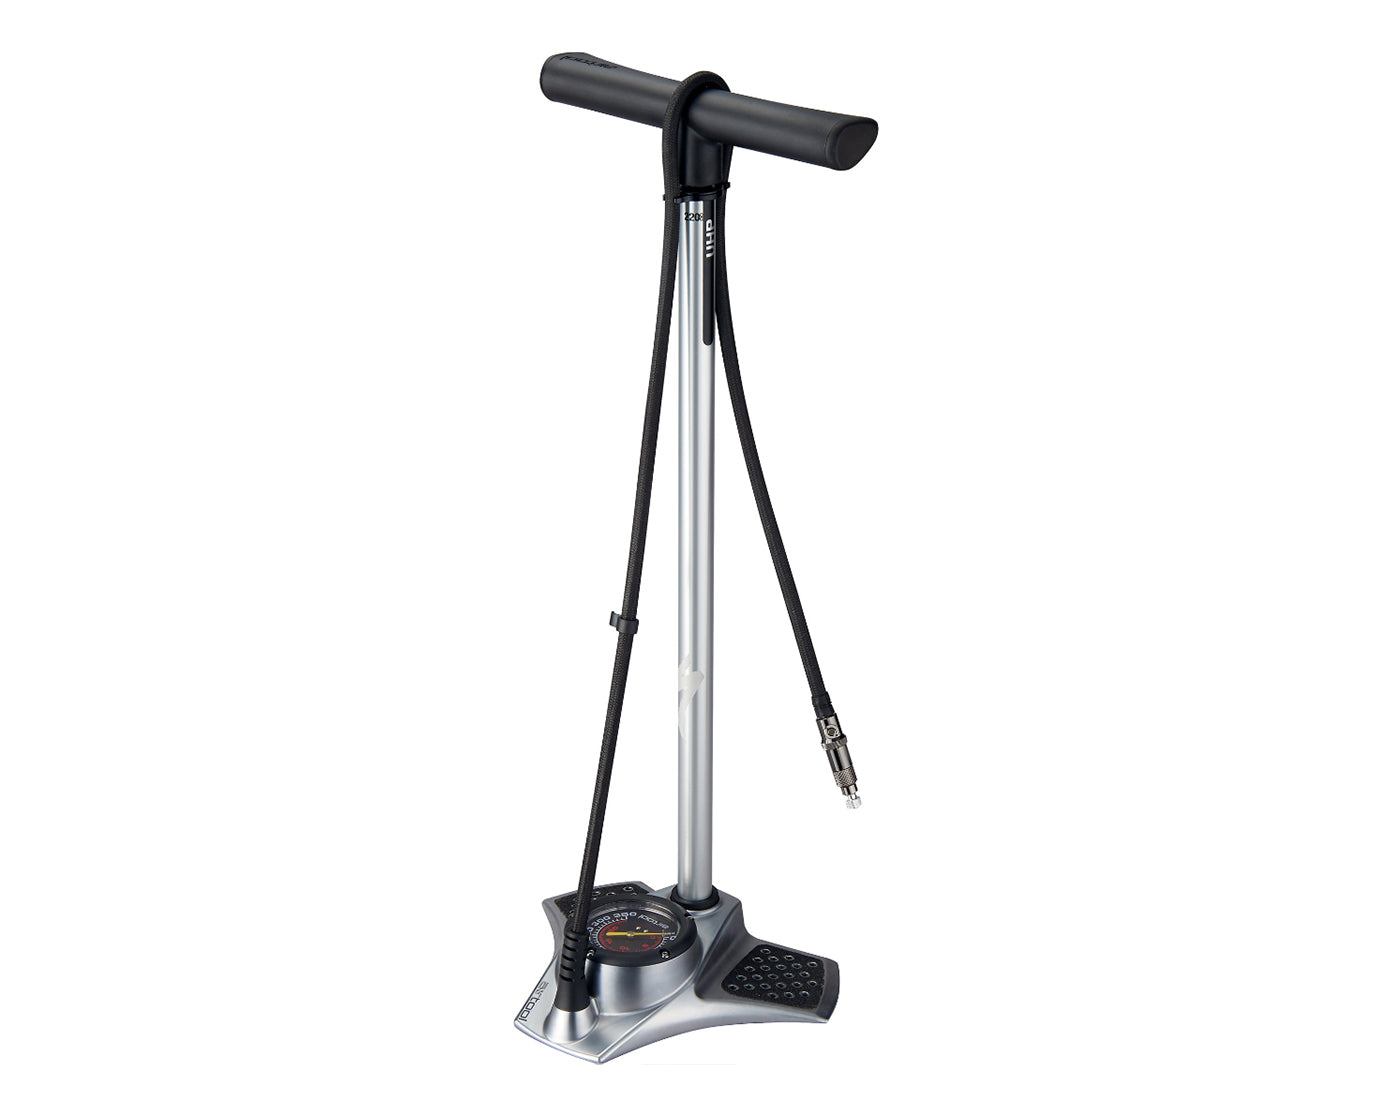 specialized uhp floor pump